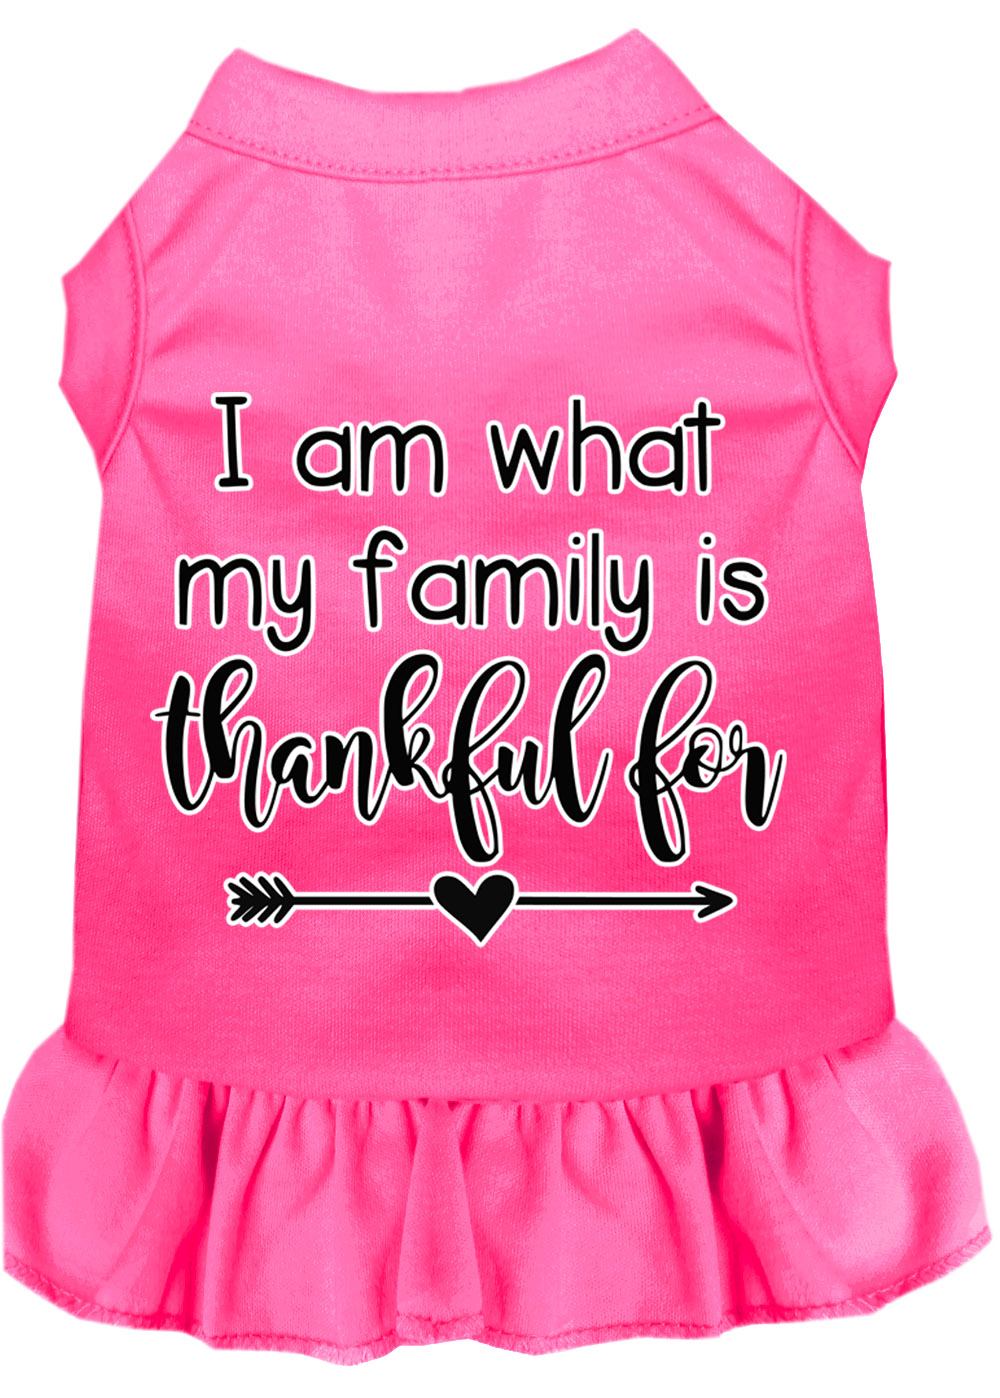 I Am What My Family is Thankful For Screen Print Dog Dress Bright Pink 4X